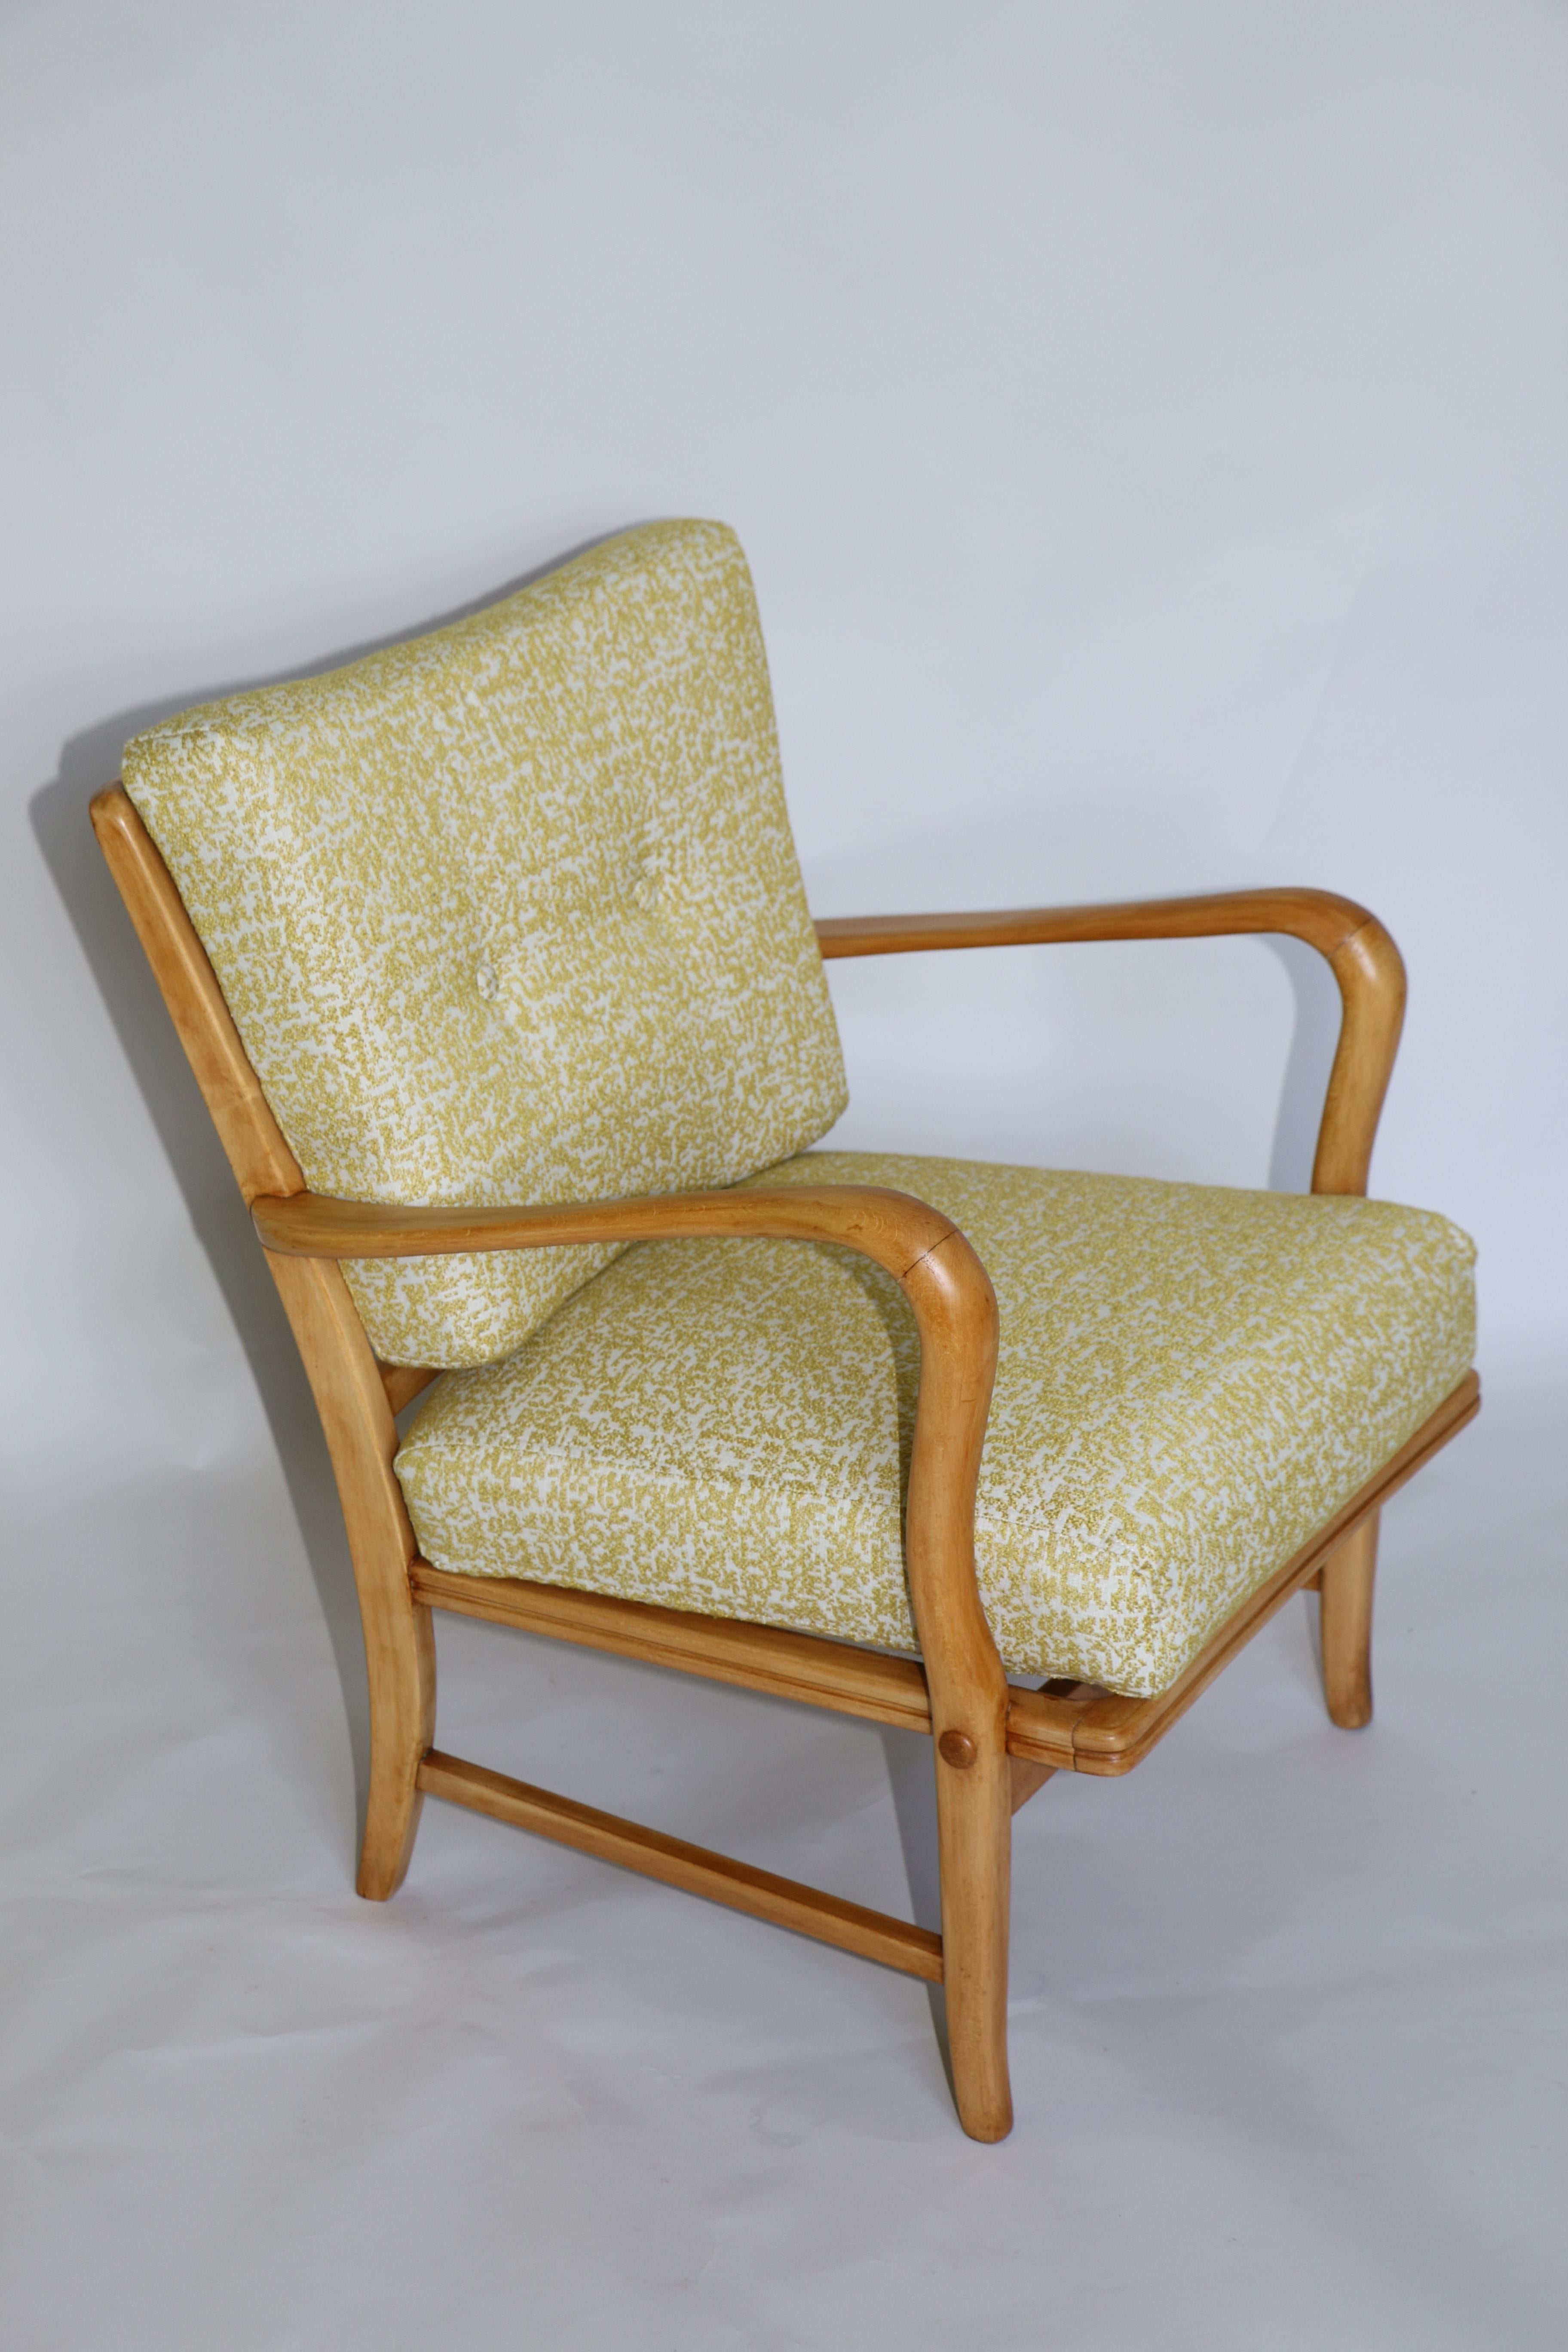 Restored Art Deco armchair in yellow fabric from 1970s, new upholstery covered with natural fabric in fashionable mix of yellow and white color on integrated cushion, finished with wooden. Wooden elements in origin natural wood color. Perfect